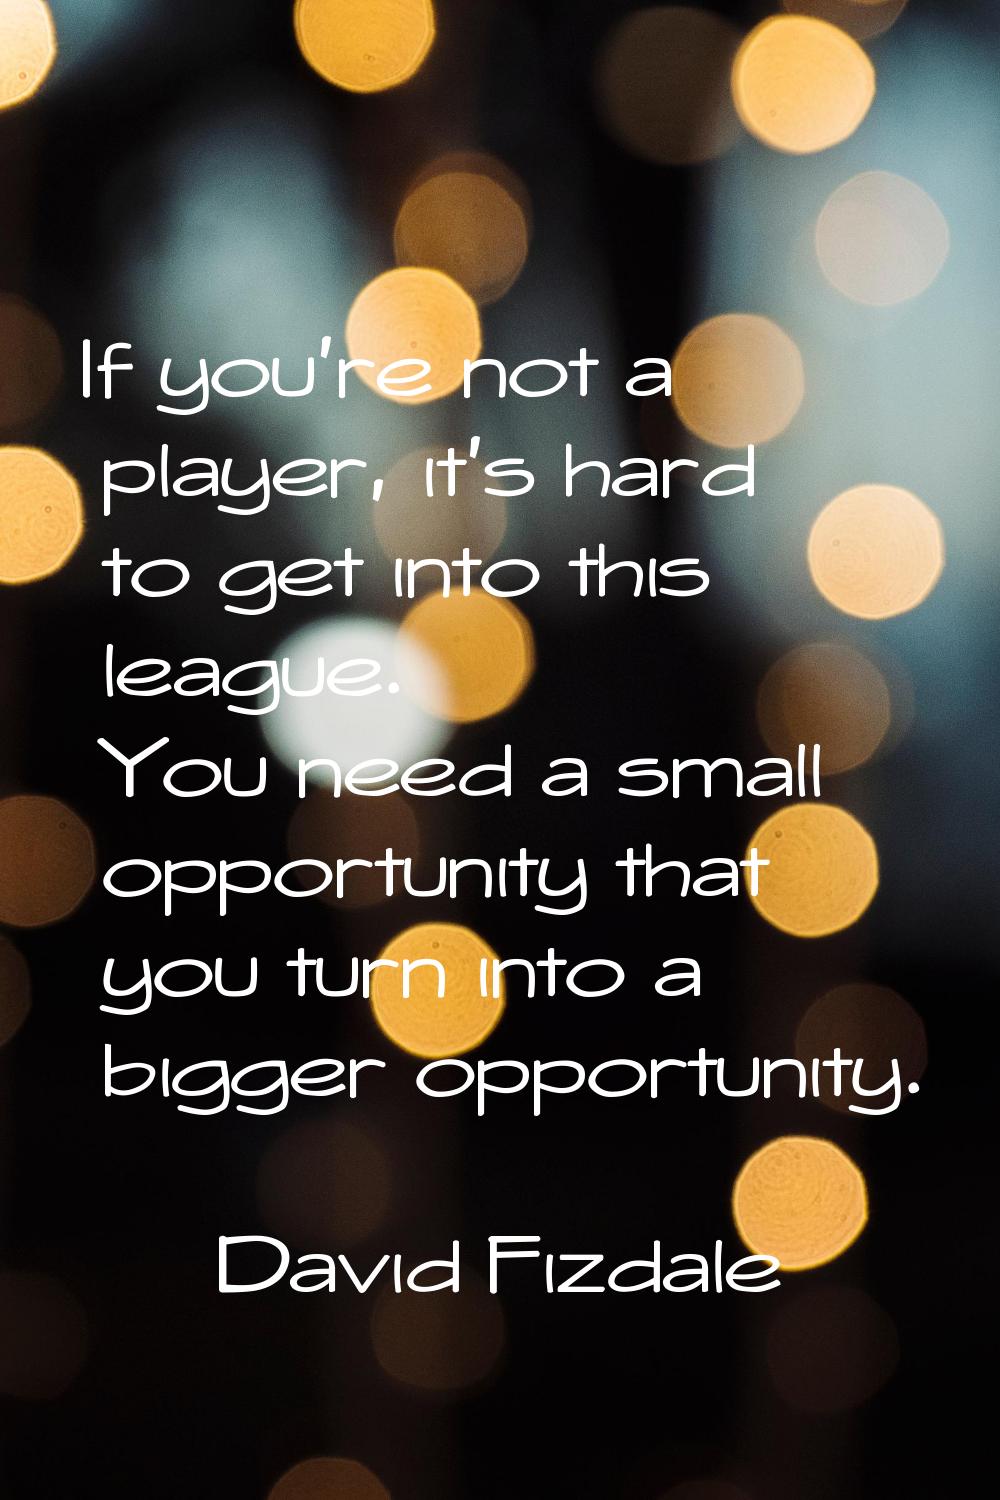 If you're not a player, it's hard to get into this league. You need a small opportunity that you tu